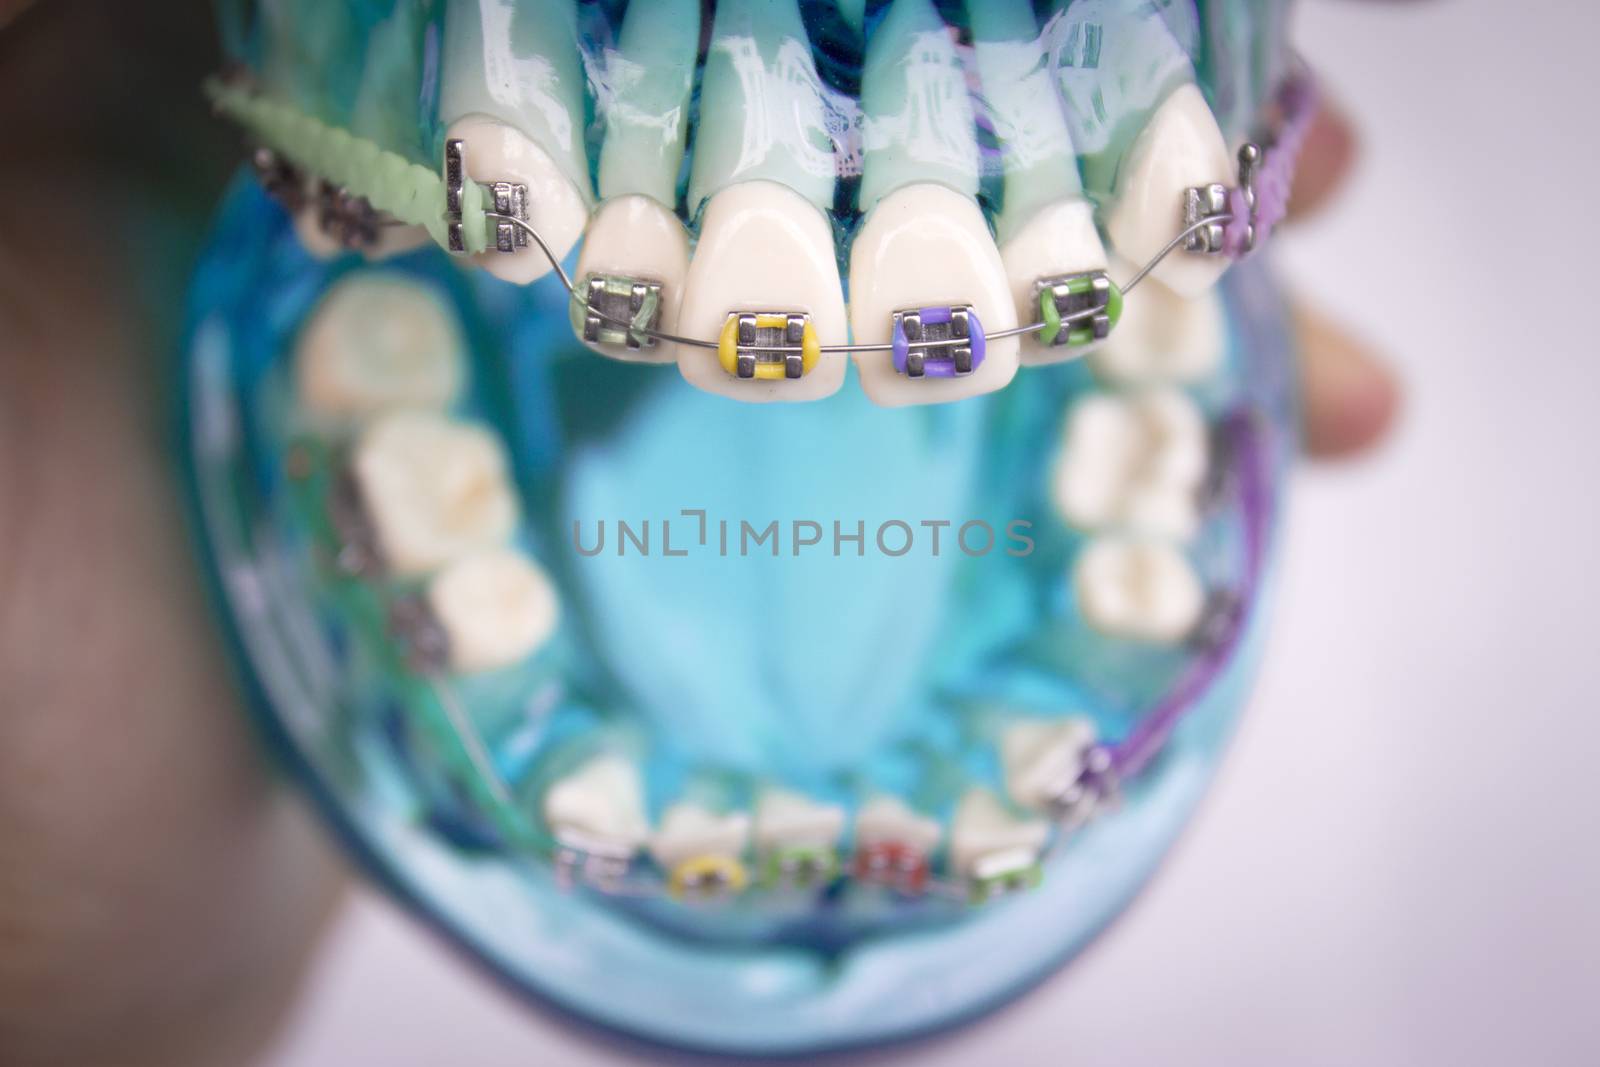 Classic dental metal orthodontics with colored hooks by GemaIbarra